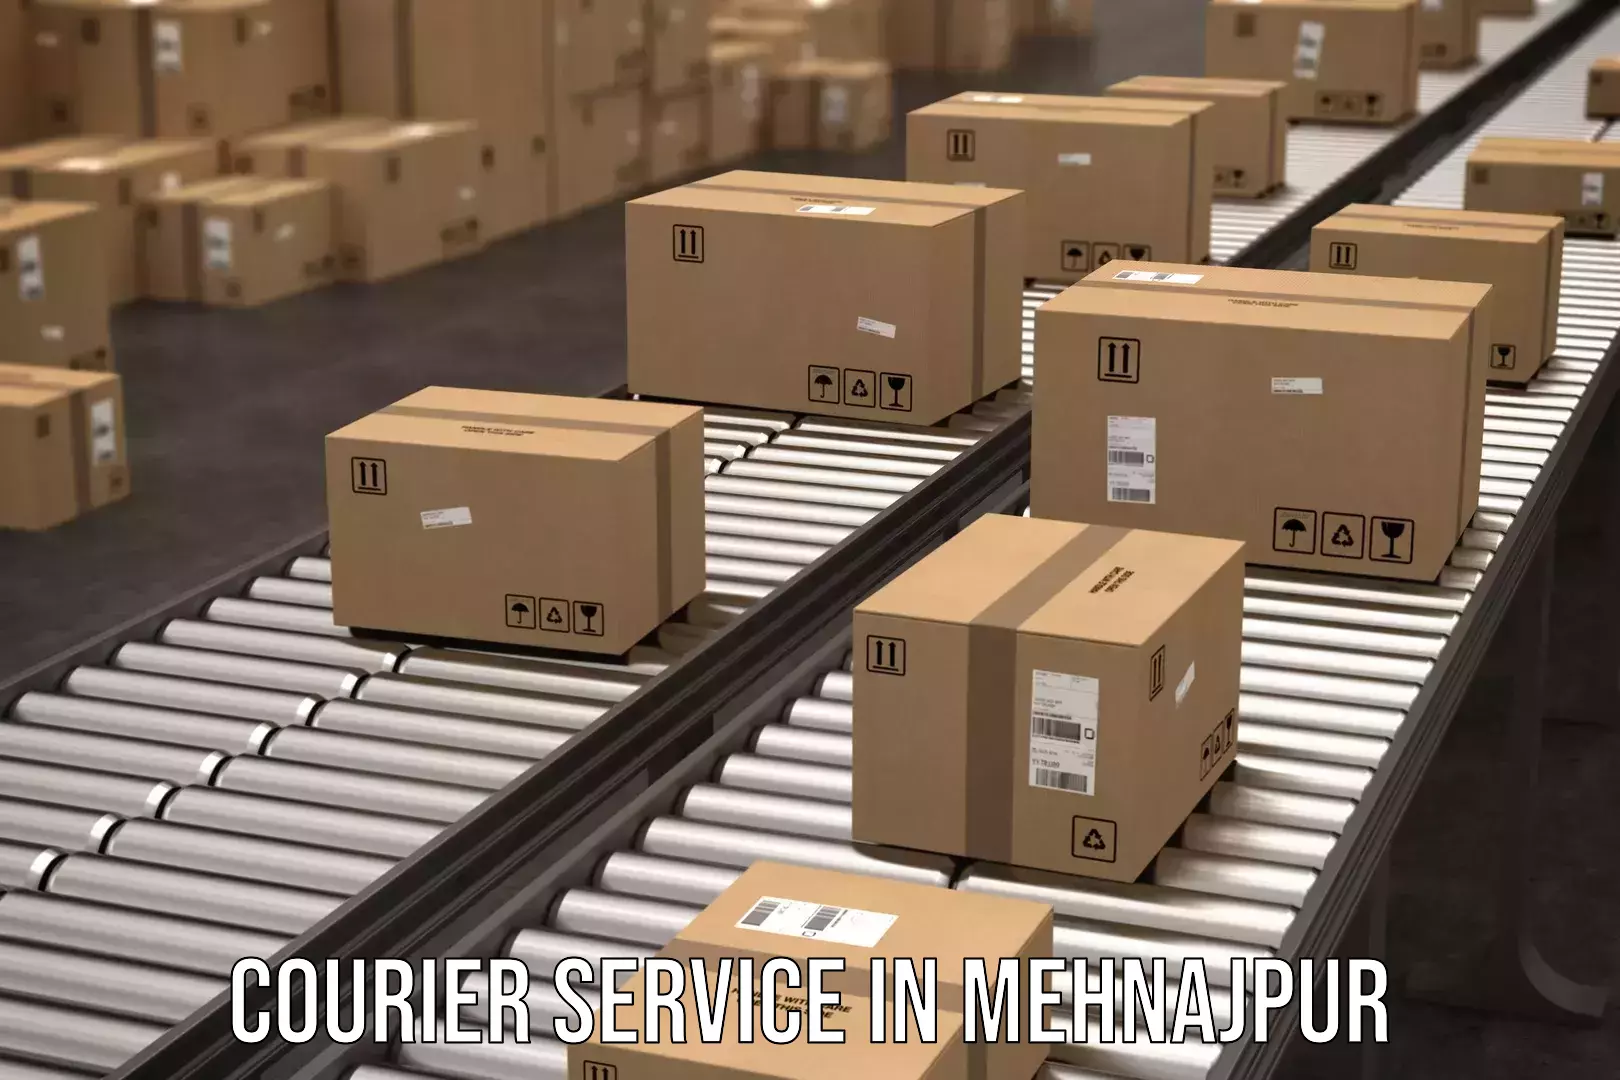 Automated shipping processes in Mehnajpur